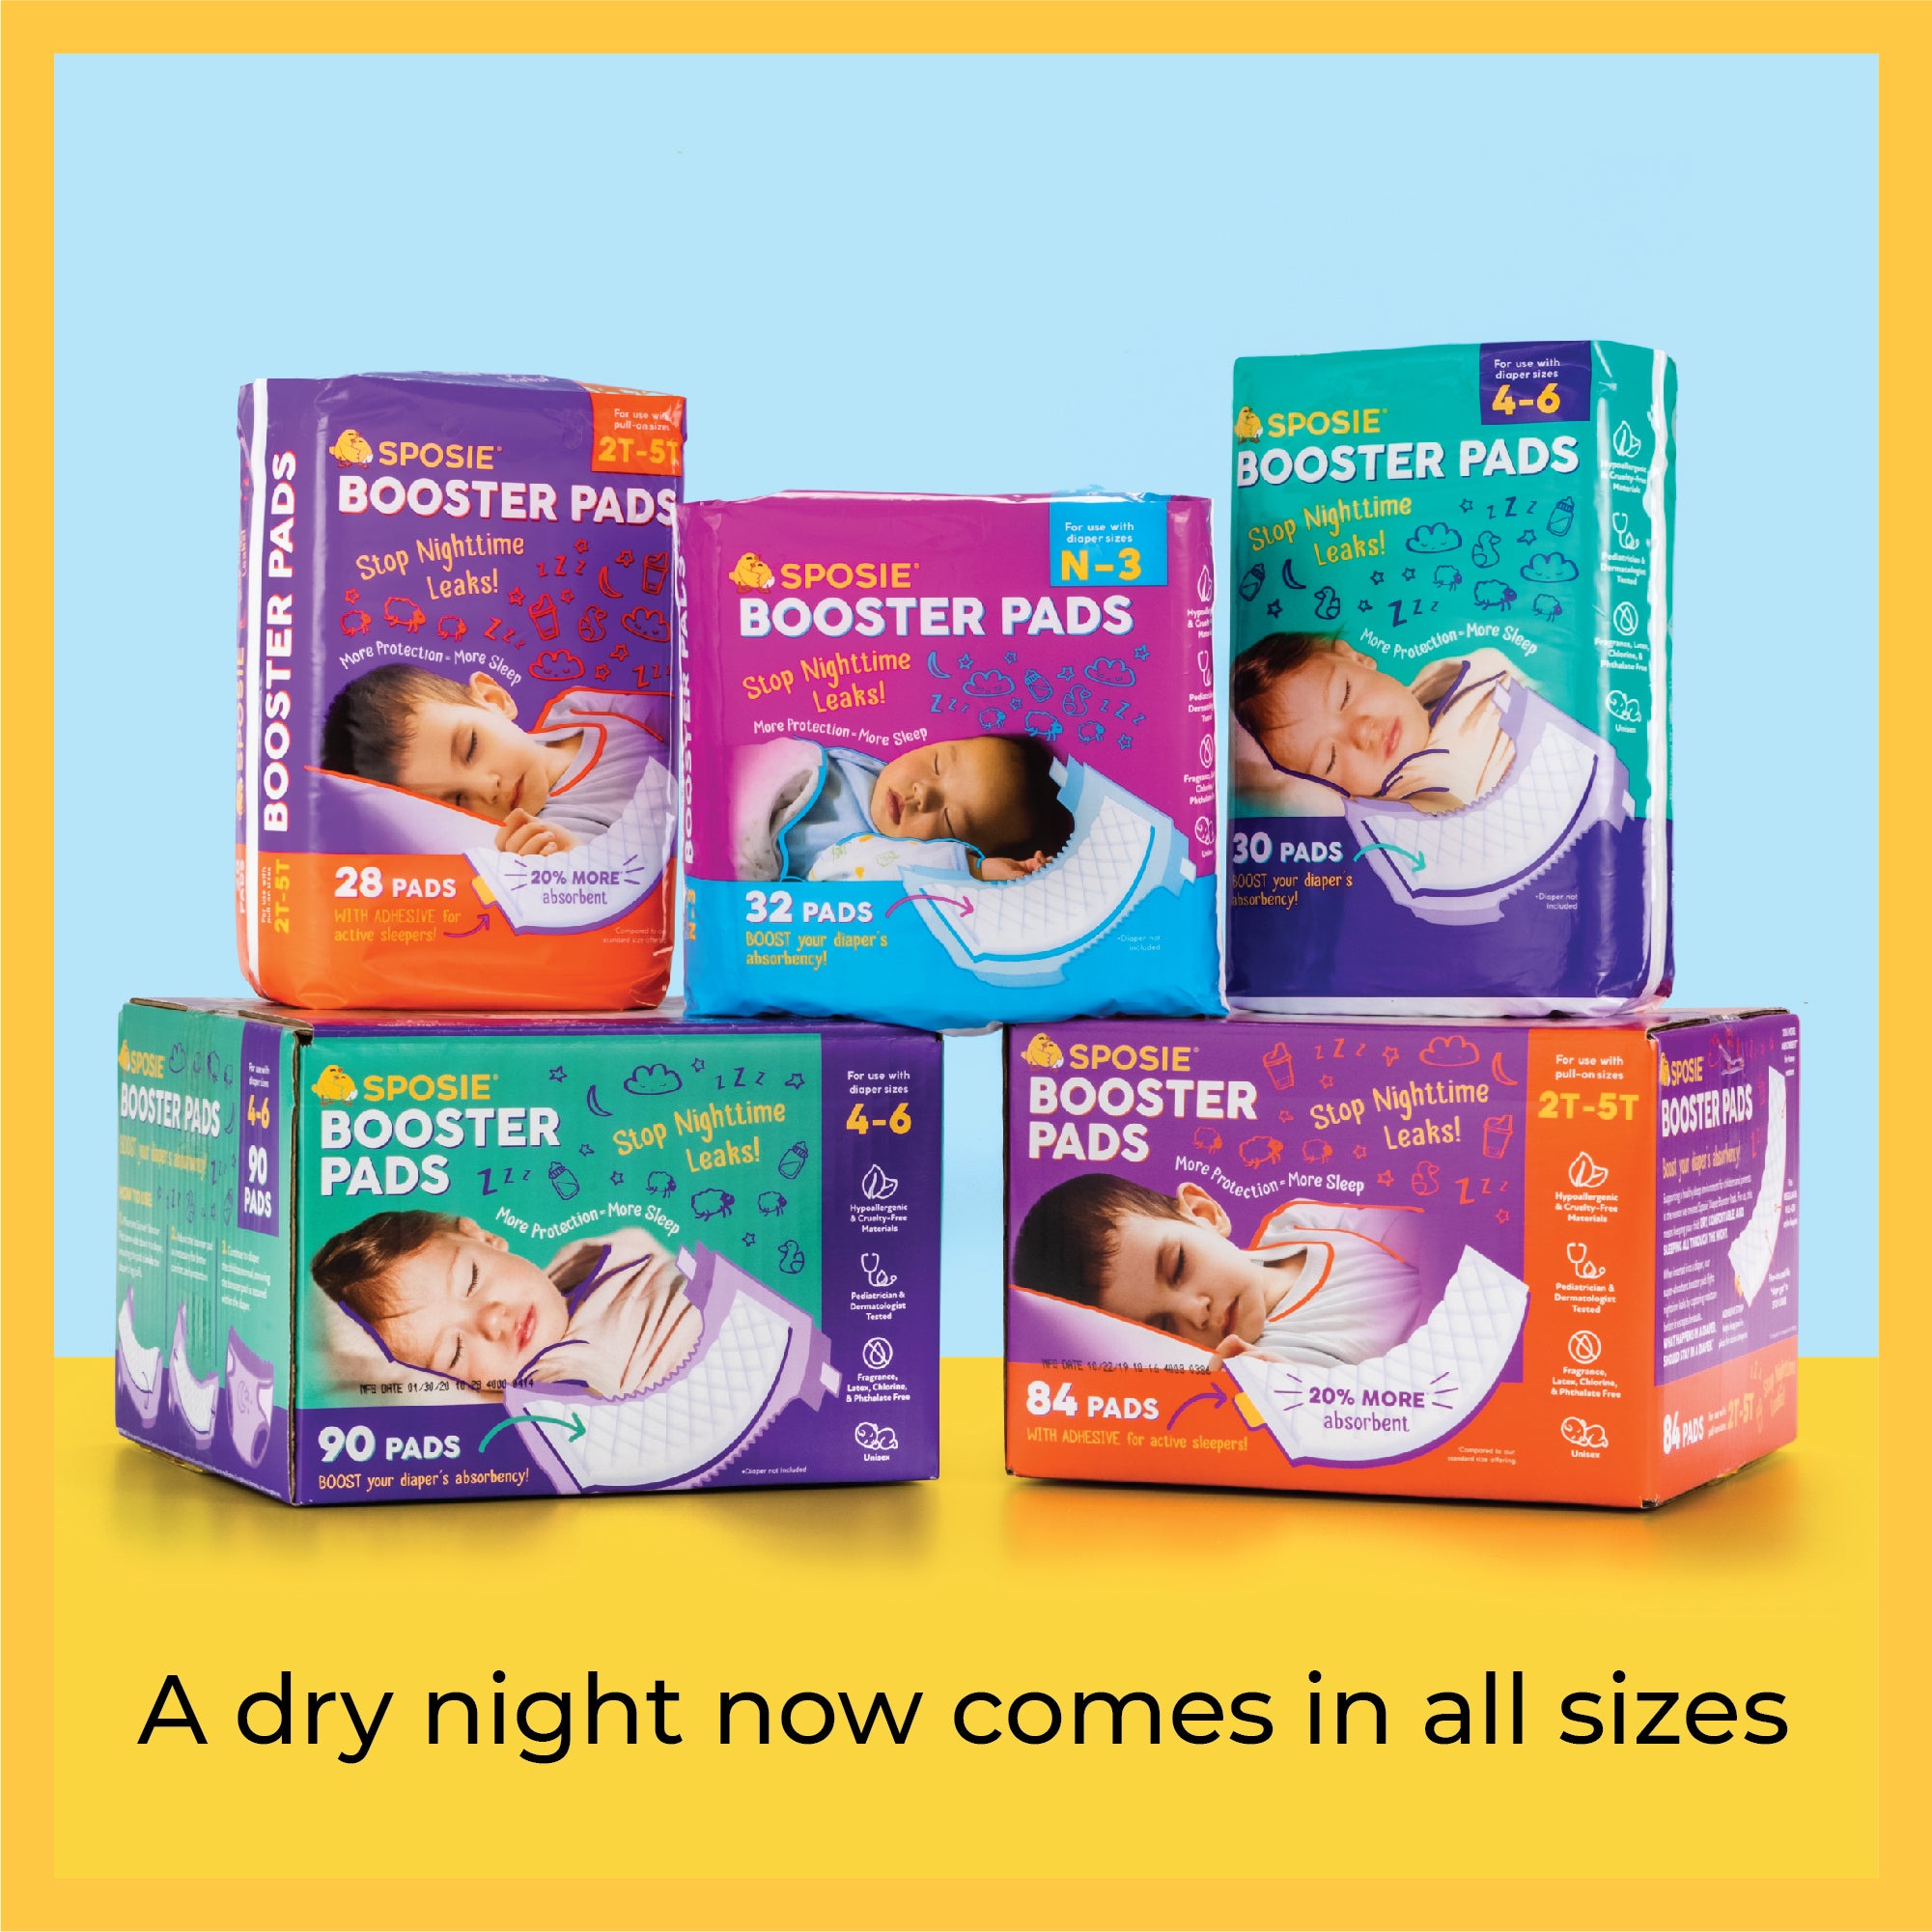 Sposie Diaper Booster Pads: Turn any diaper into an overnight diaper